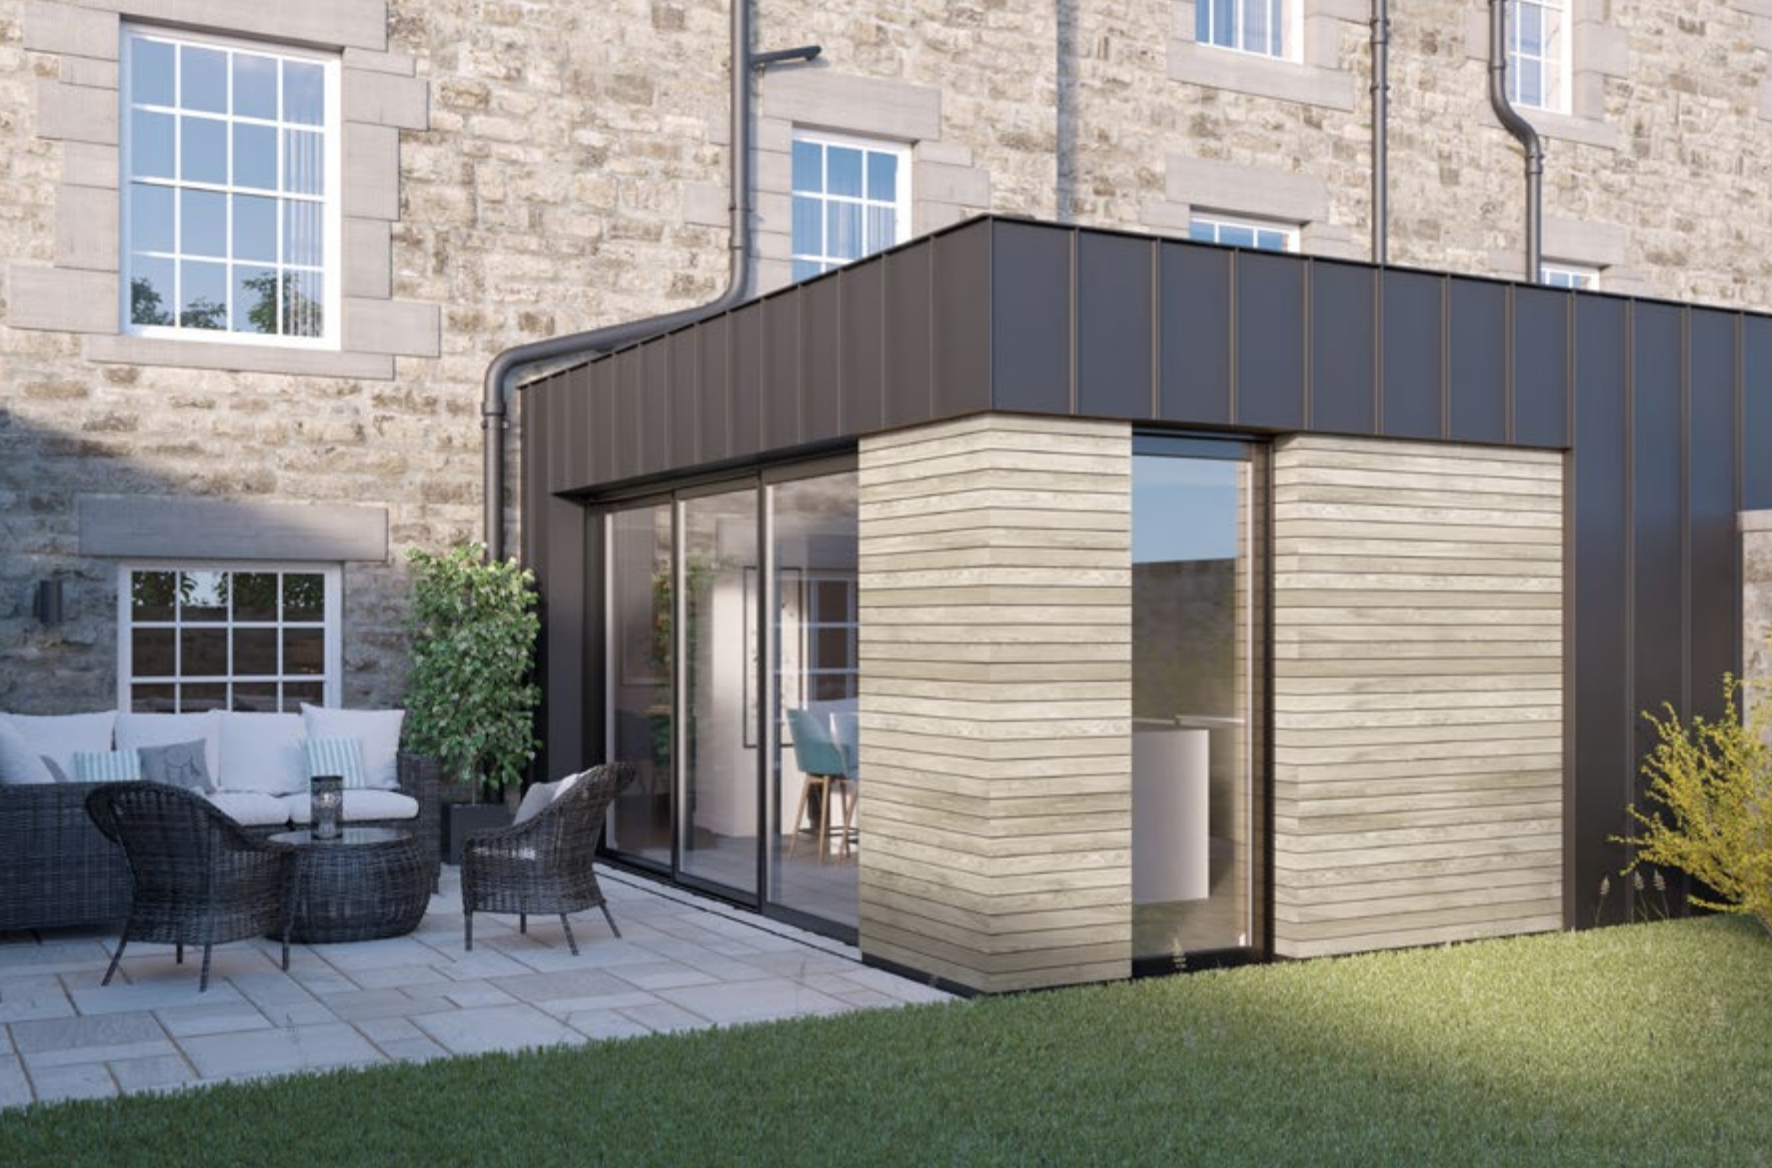 </p> <p>Find your ideal home design pro on designfor-me.com - get matched and see who's interested in your home project. Click image to see more inspiration from our design pros</p> <p>Design by Jonathan, architectural designer from Northumberland, North East</p> <p>#architecture #homedesign #modernhomes #homeinspiration #extensions #extensiondesign #extensioninspiration #extensionideas #houseextension #glazing #architecturalglazing #naturallight #bifolddoors #bifolds </p> <p>